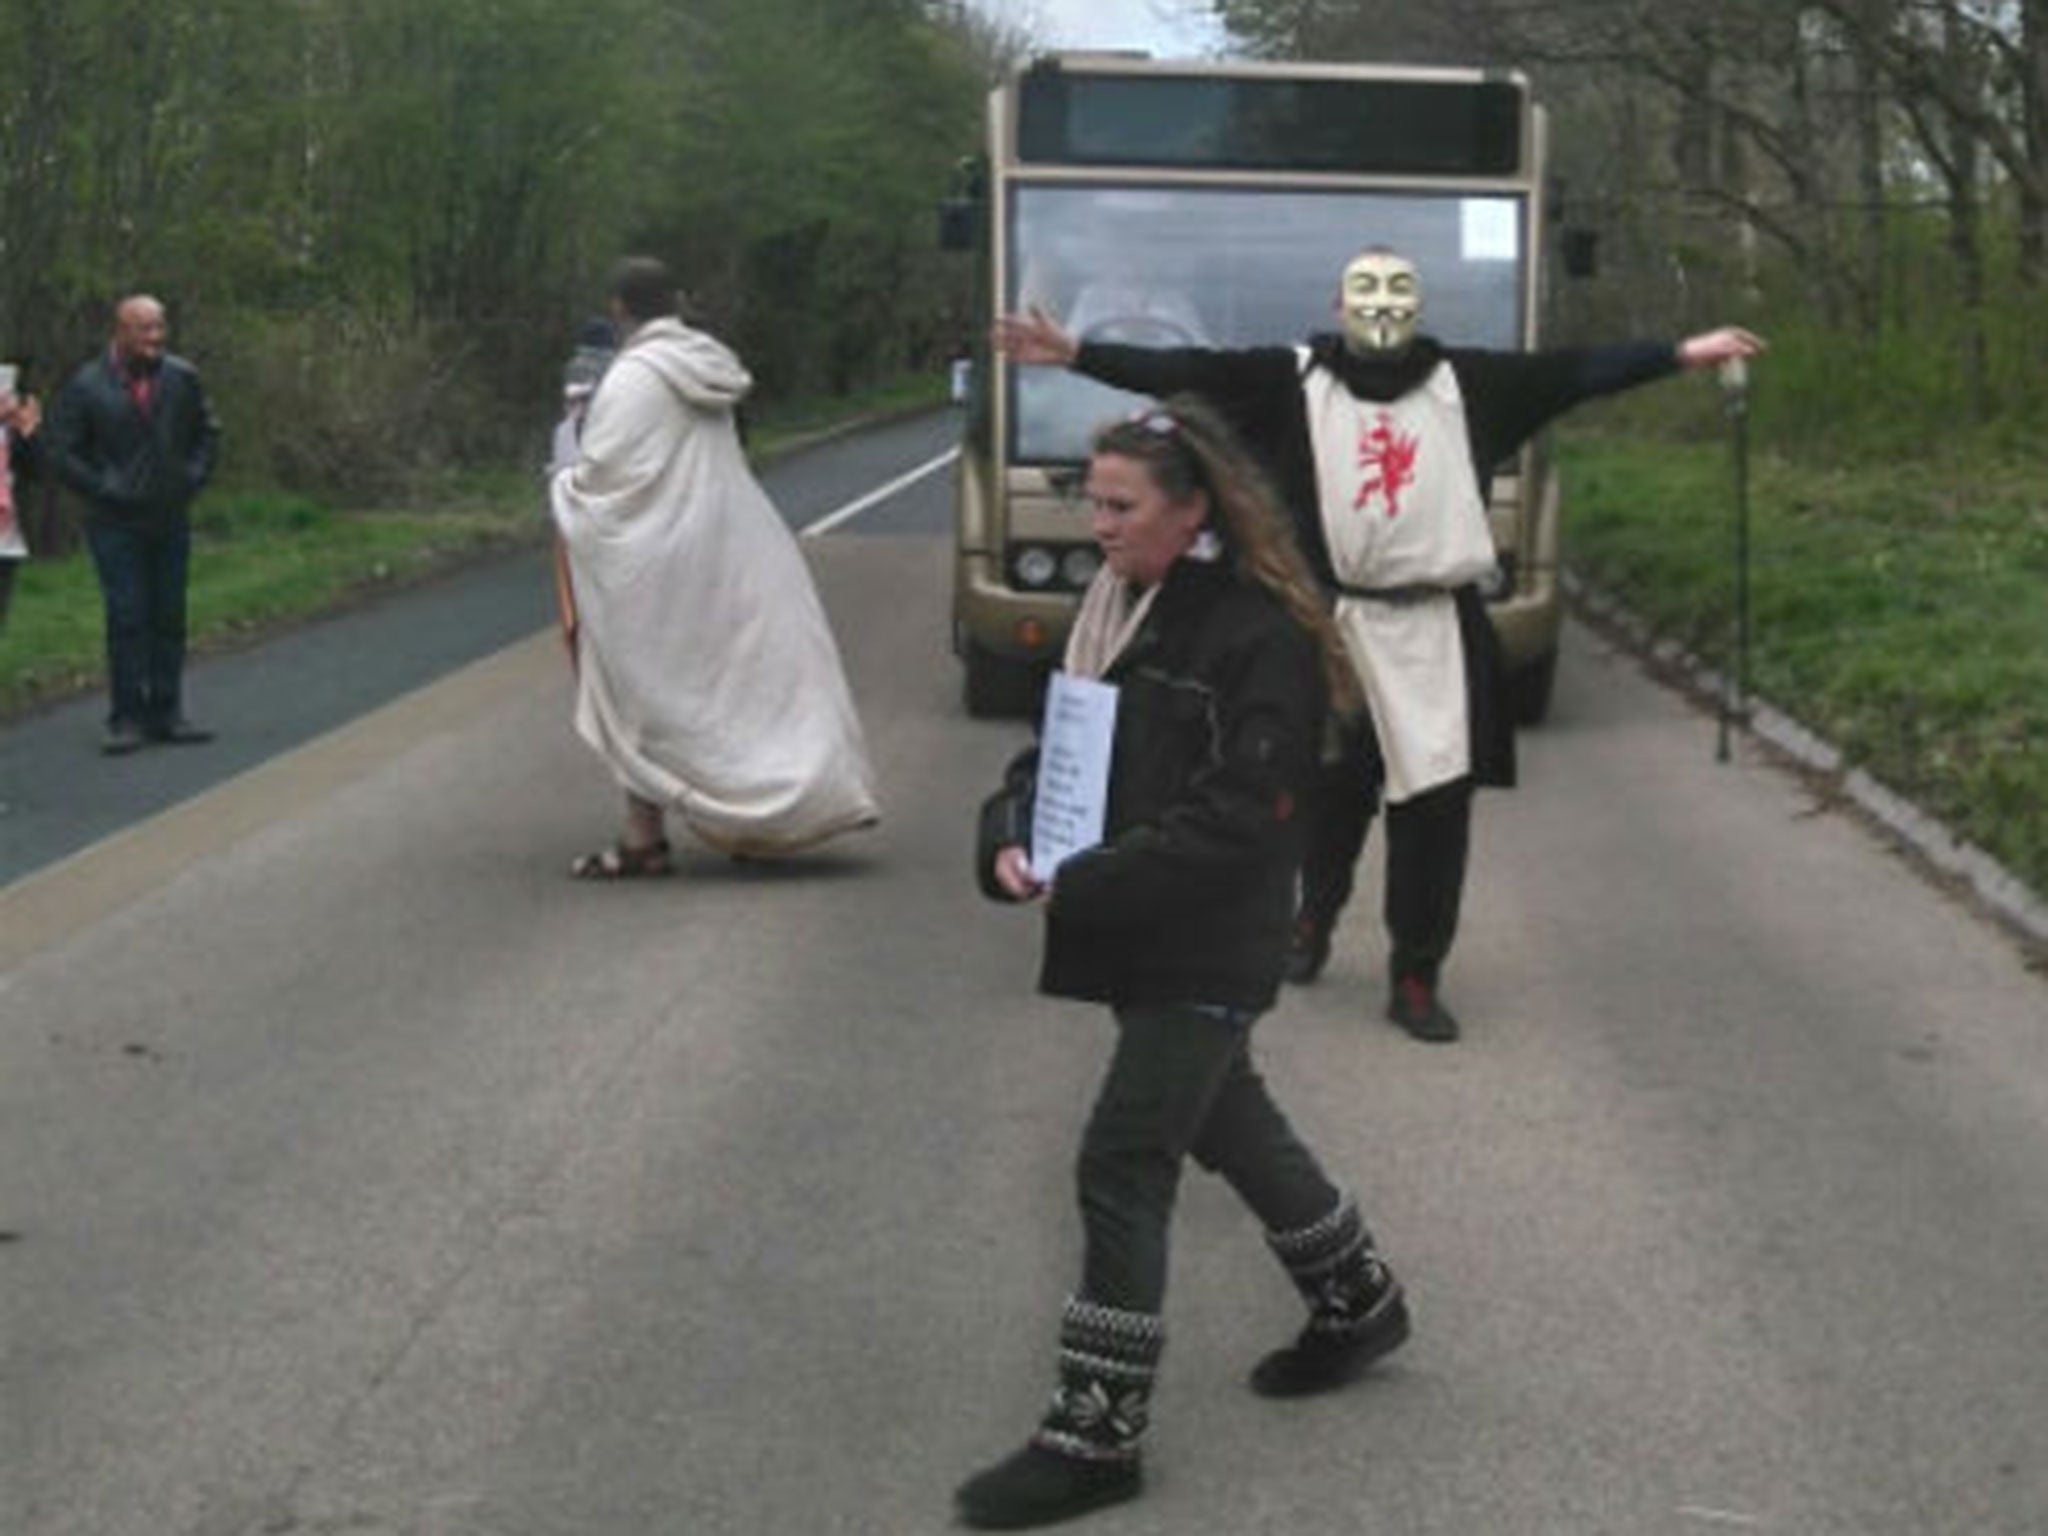 A druid protests in front of one of English Heritage's coaches